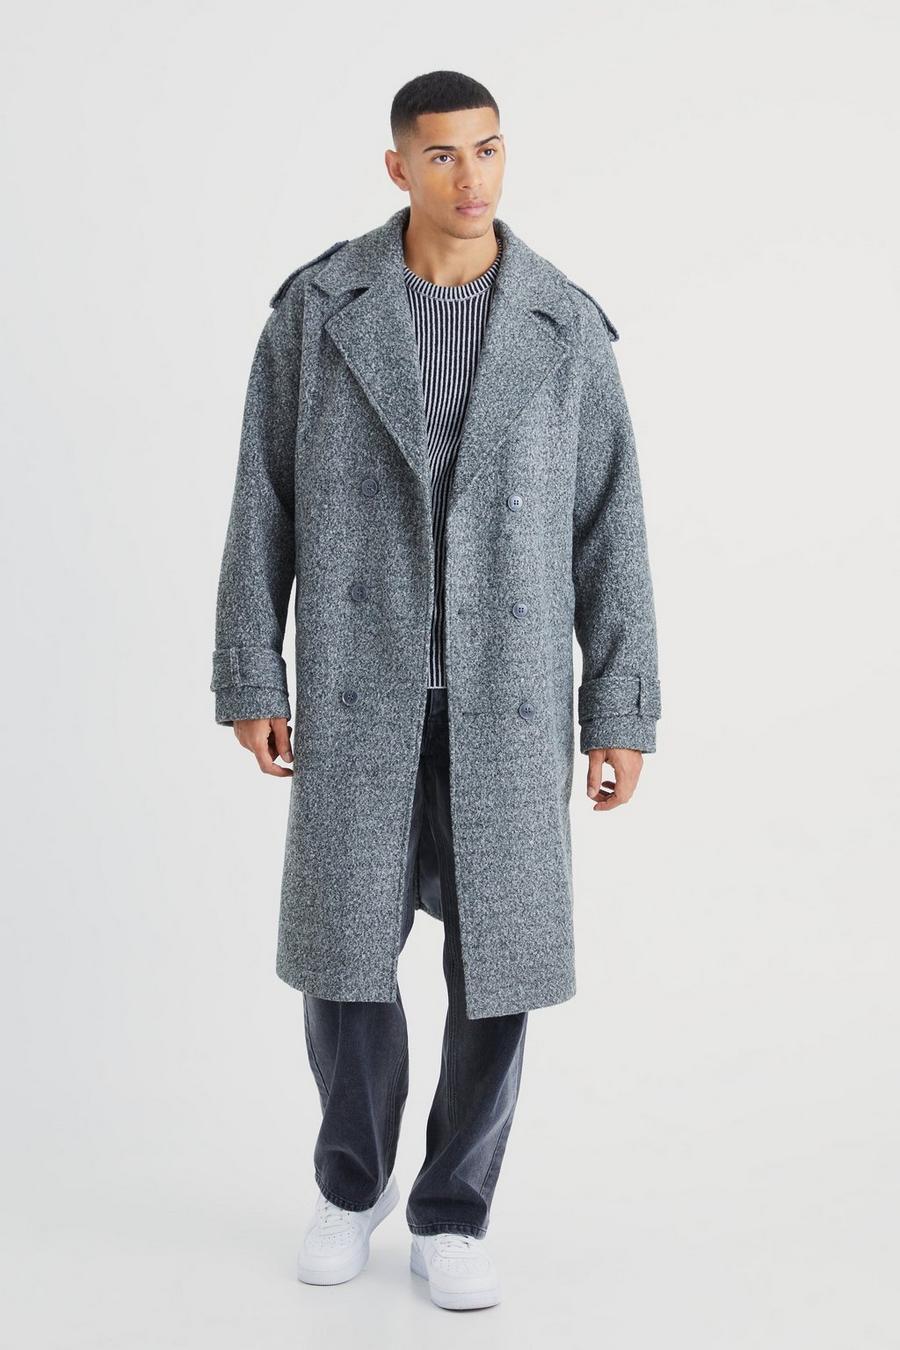 Charcoal grey Double Breasted Salt & Pepper Overcoat